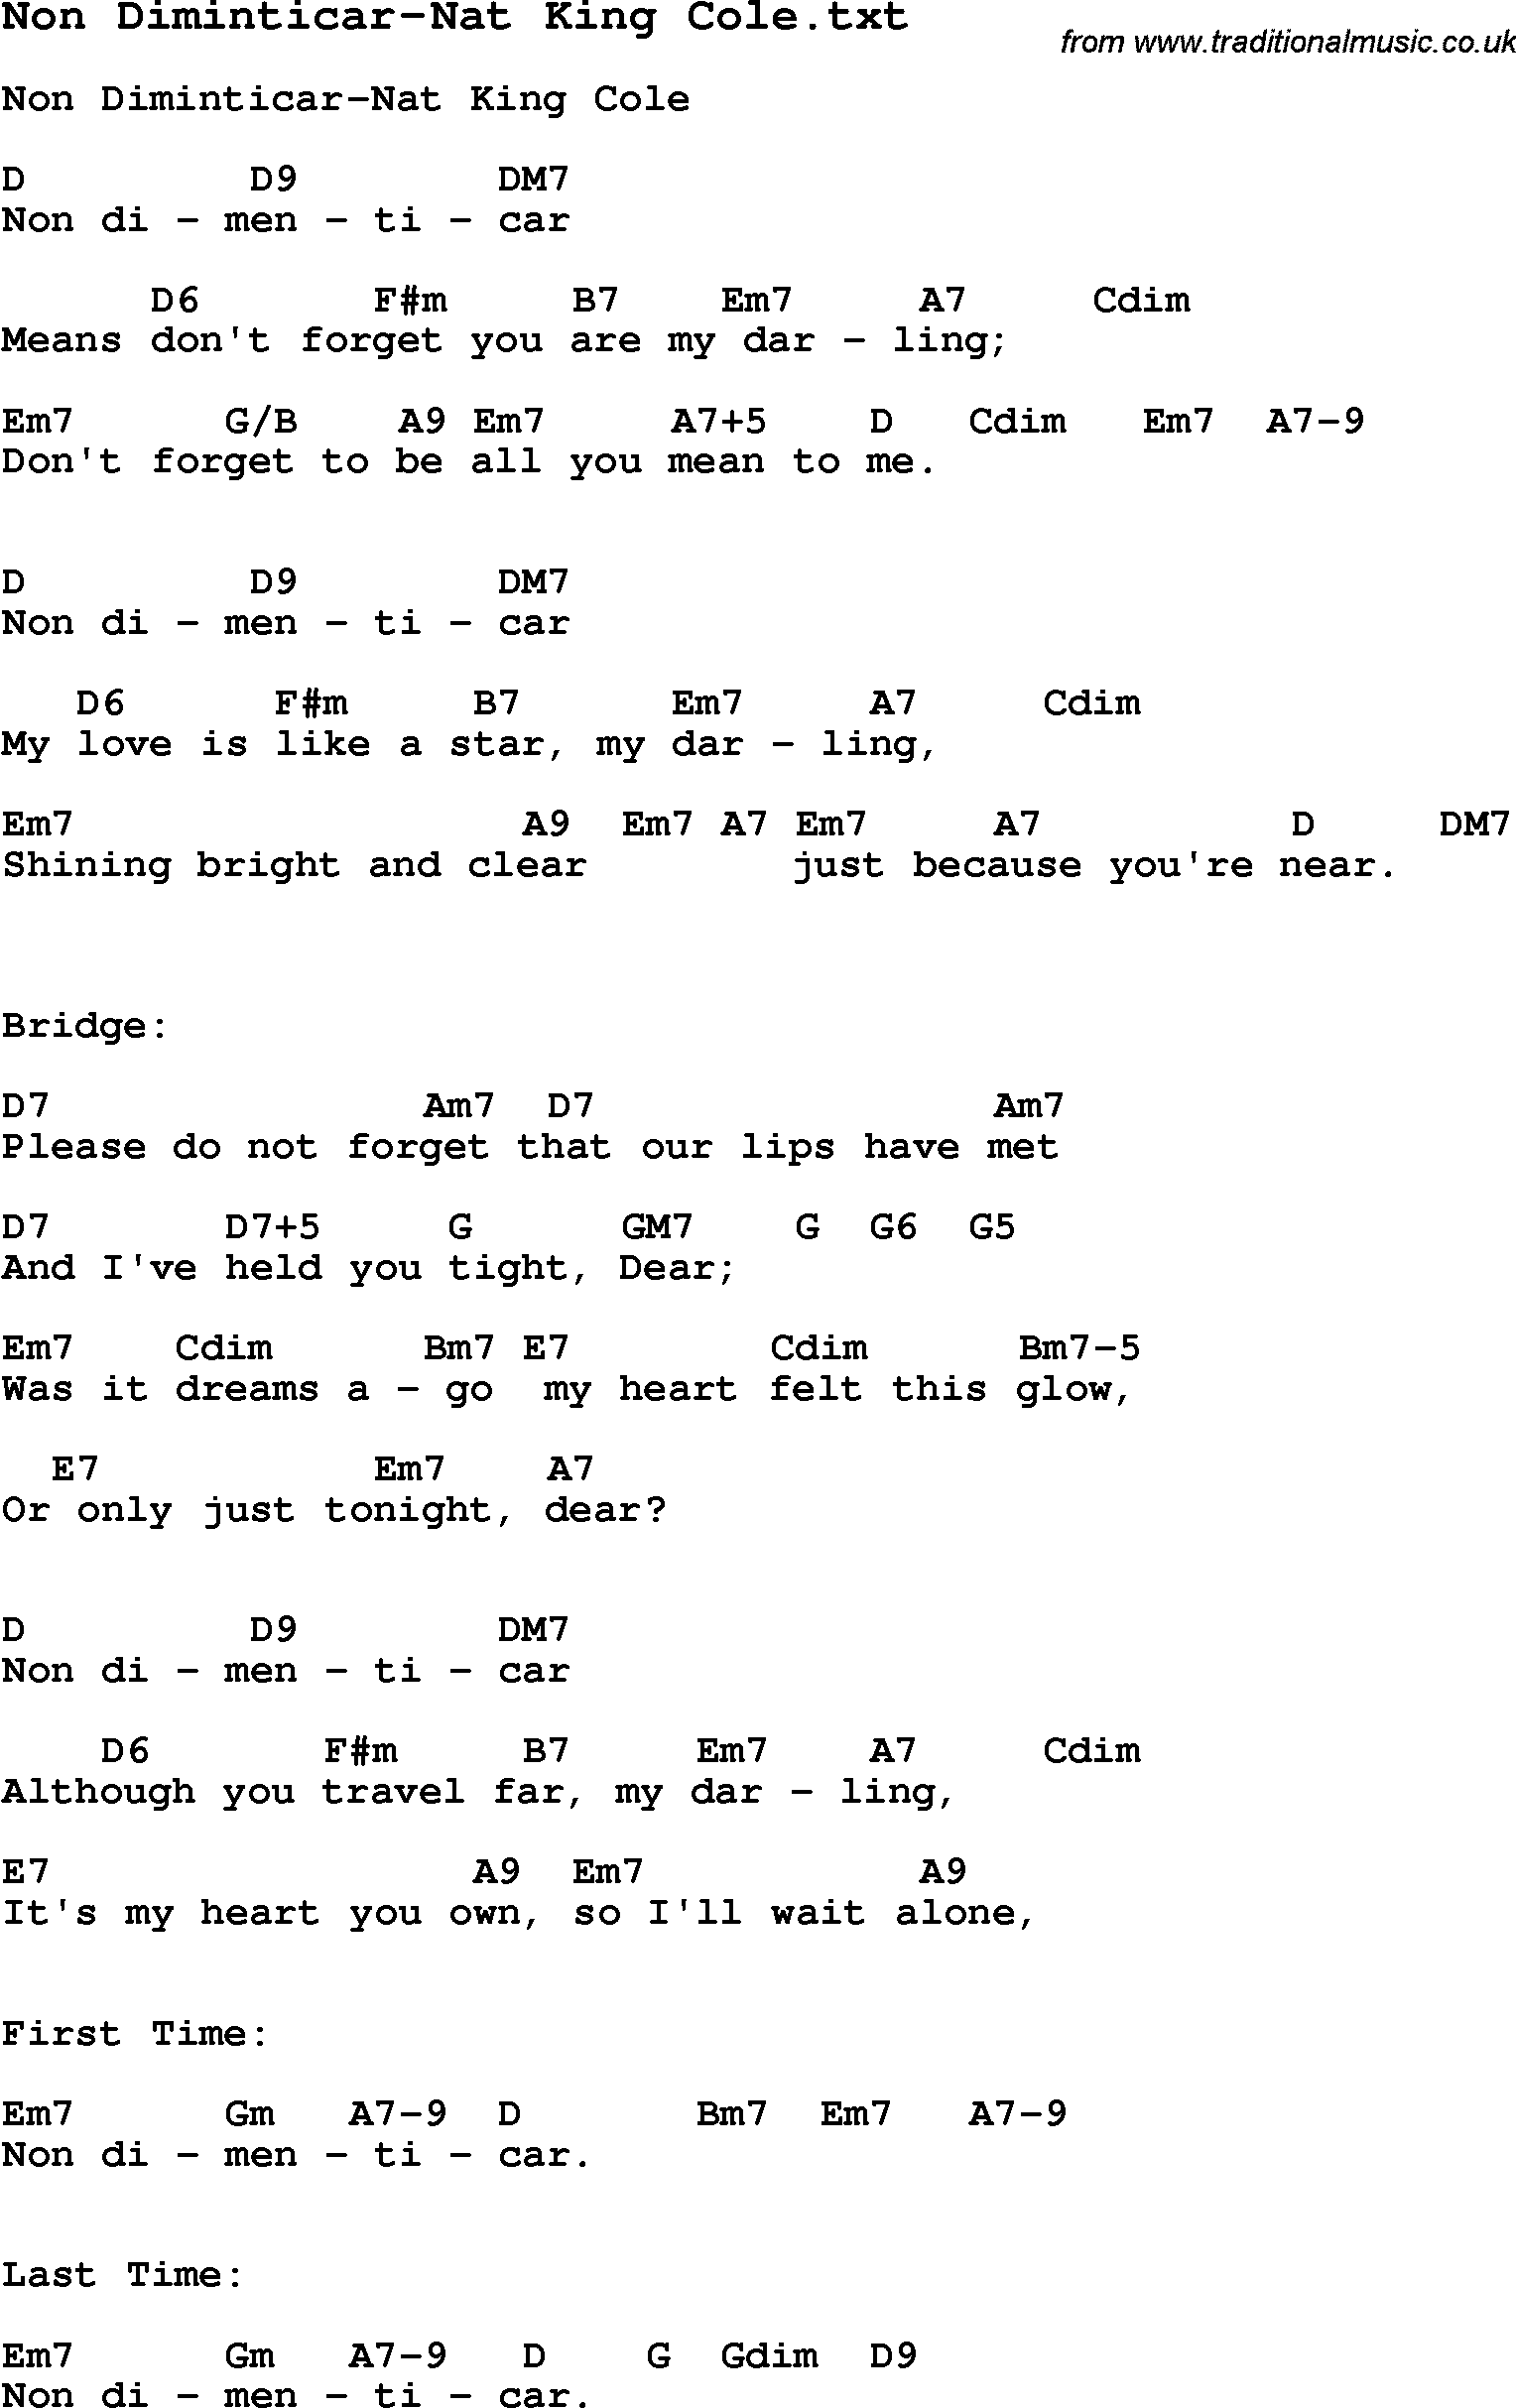 Jazz Song from top bands and vocal artists with chords, tabs and lyrics - Non Diminticar-Nat King Cole